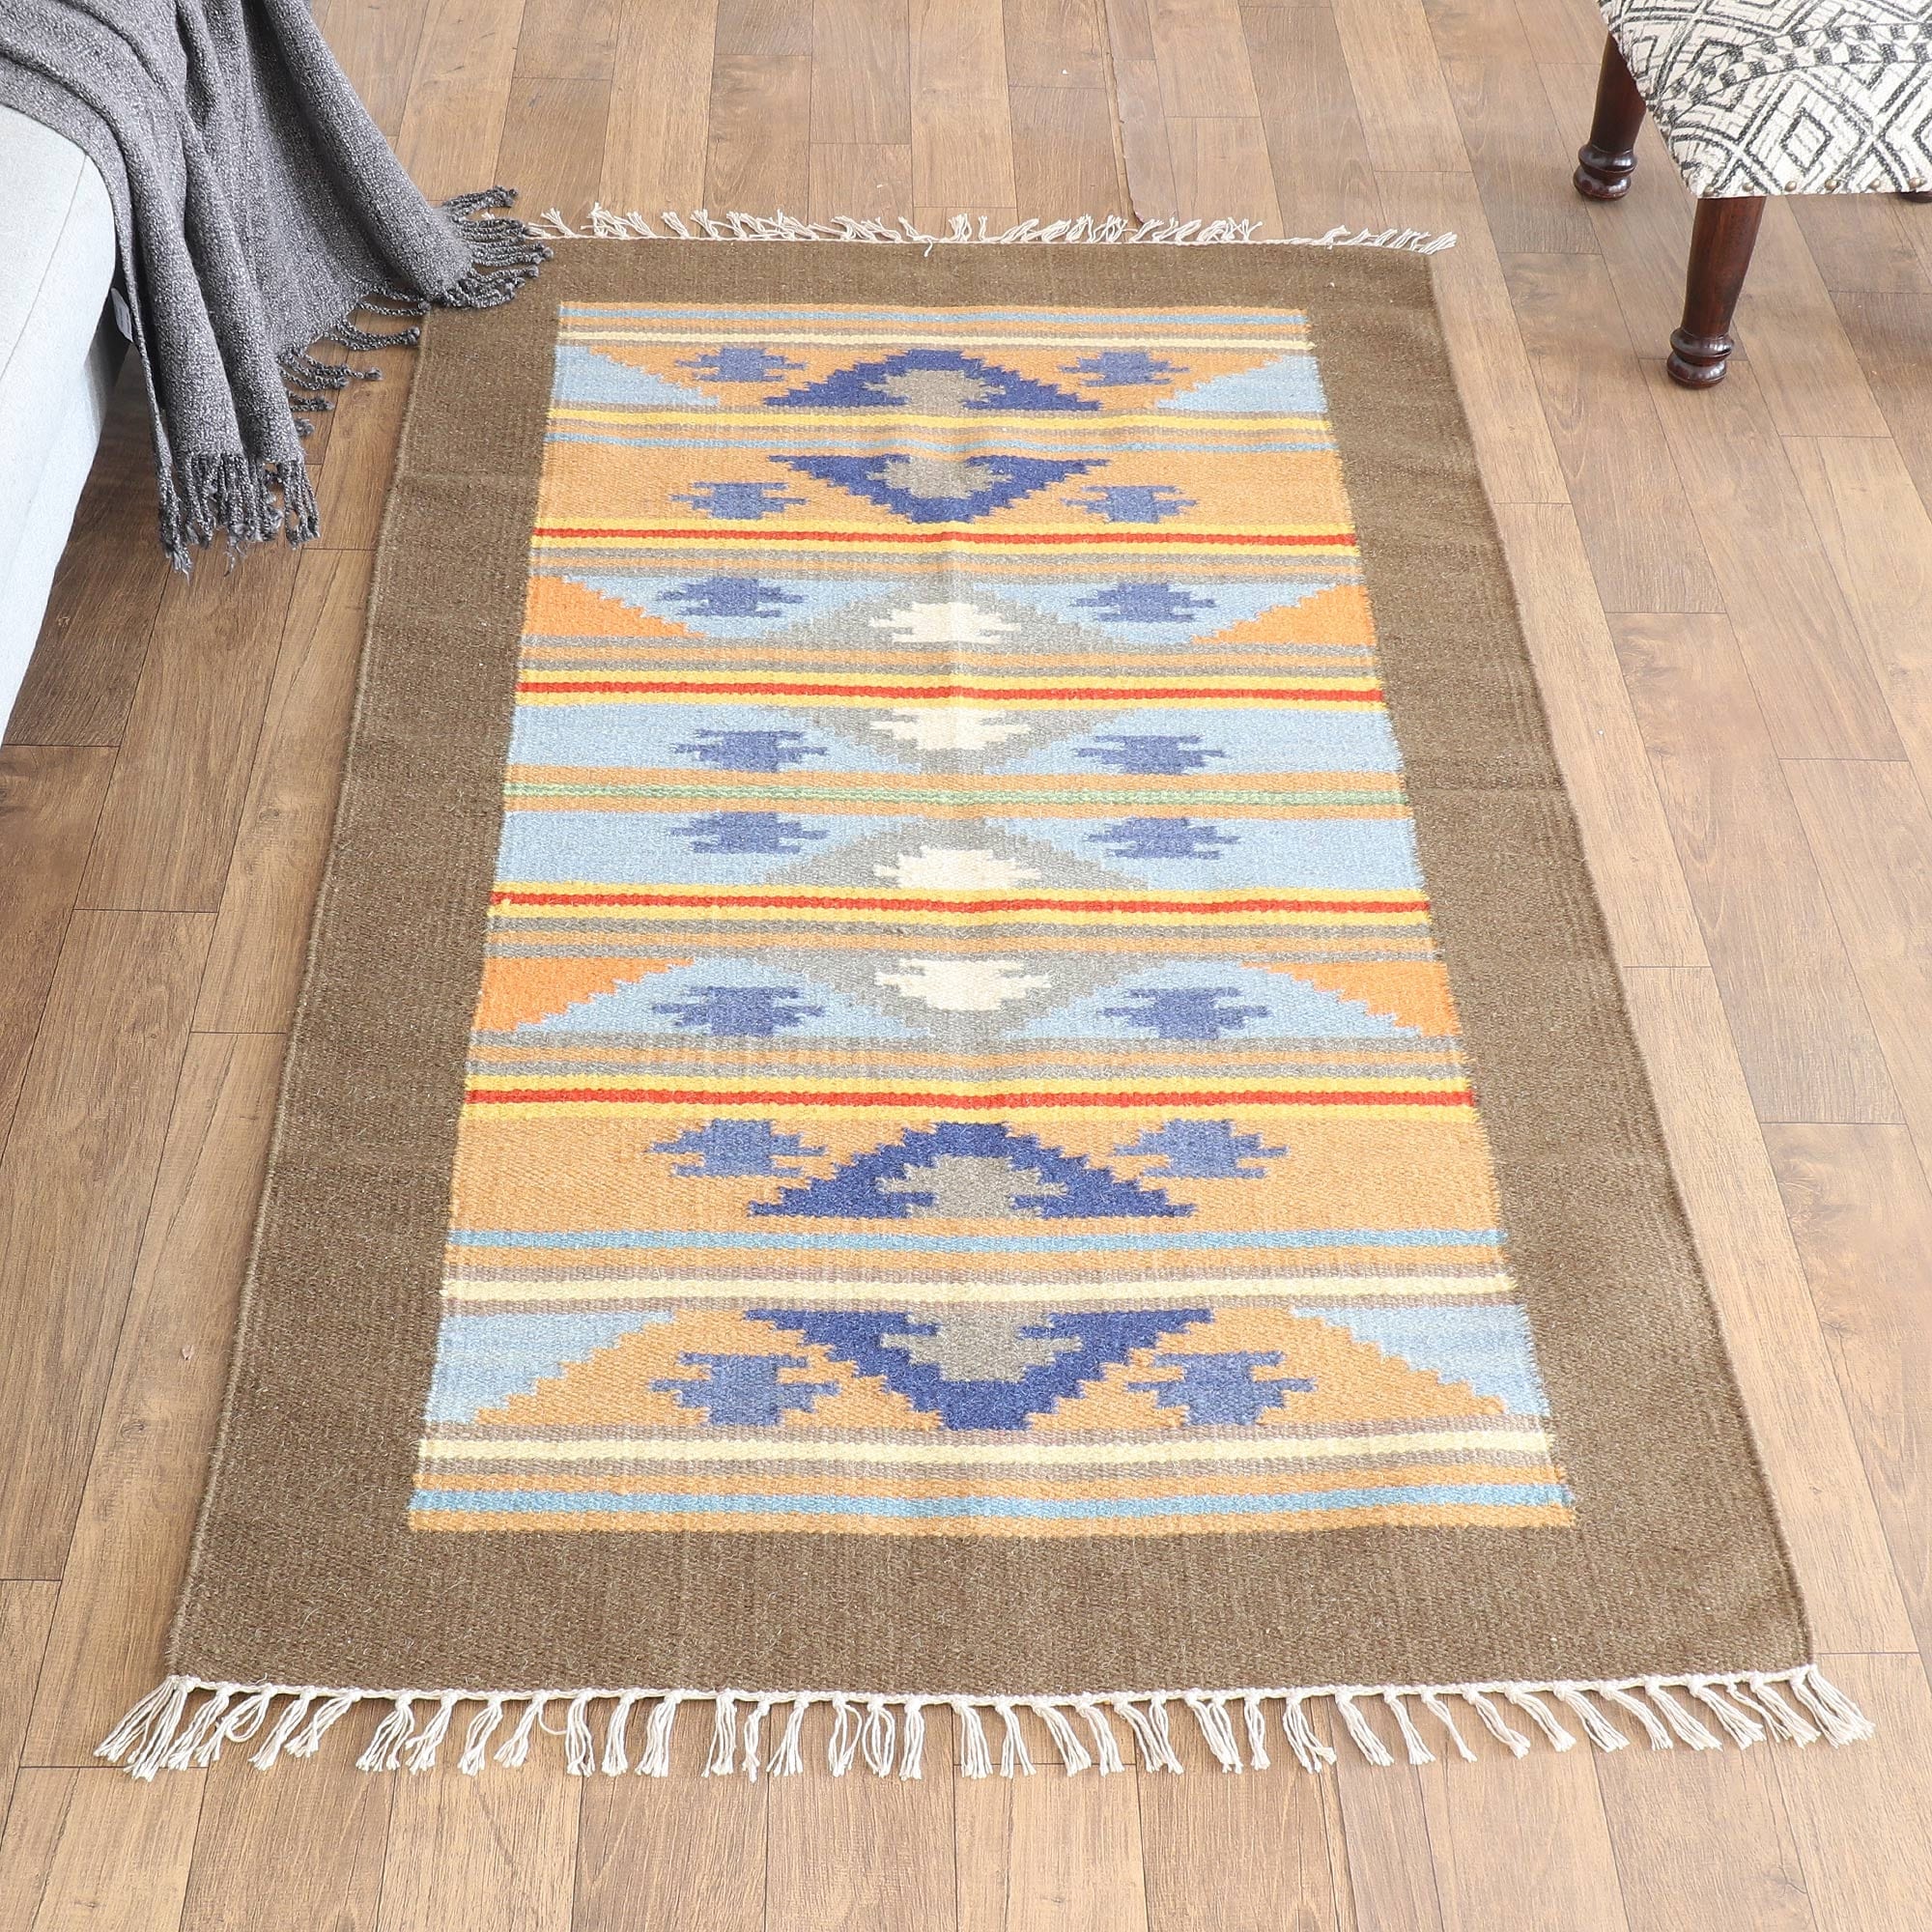 NOVICA Handmade Colors from The Silk Road Wool Area Rug (2.5x4) - 2' x 6' Runner - Multi